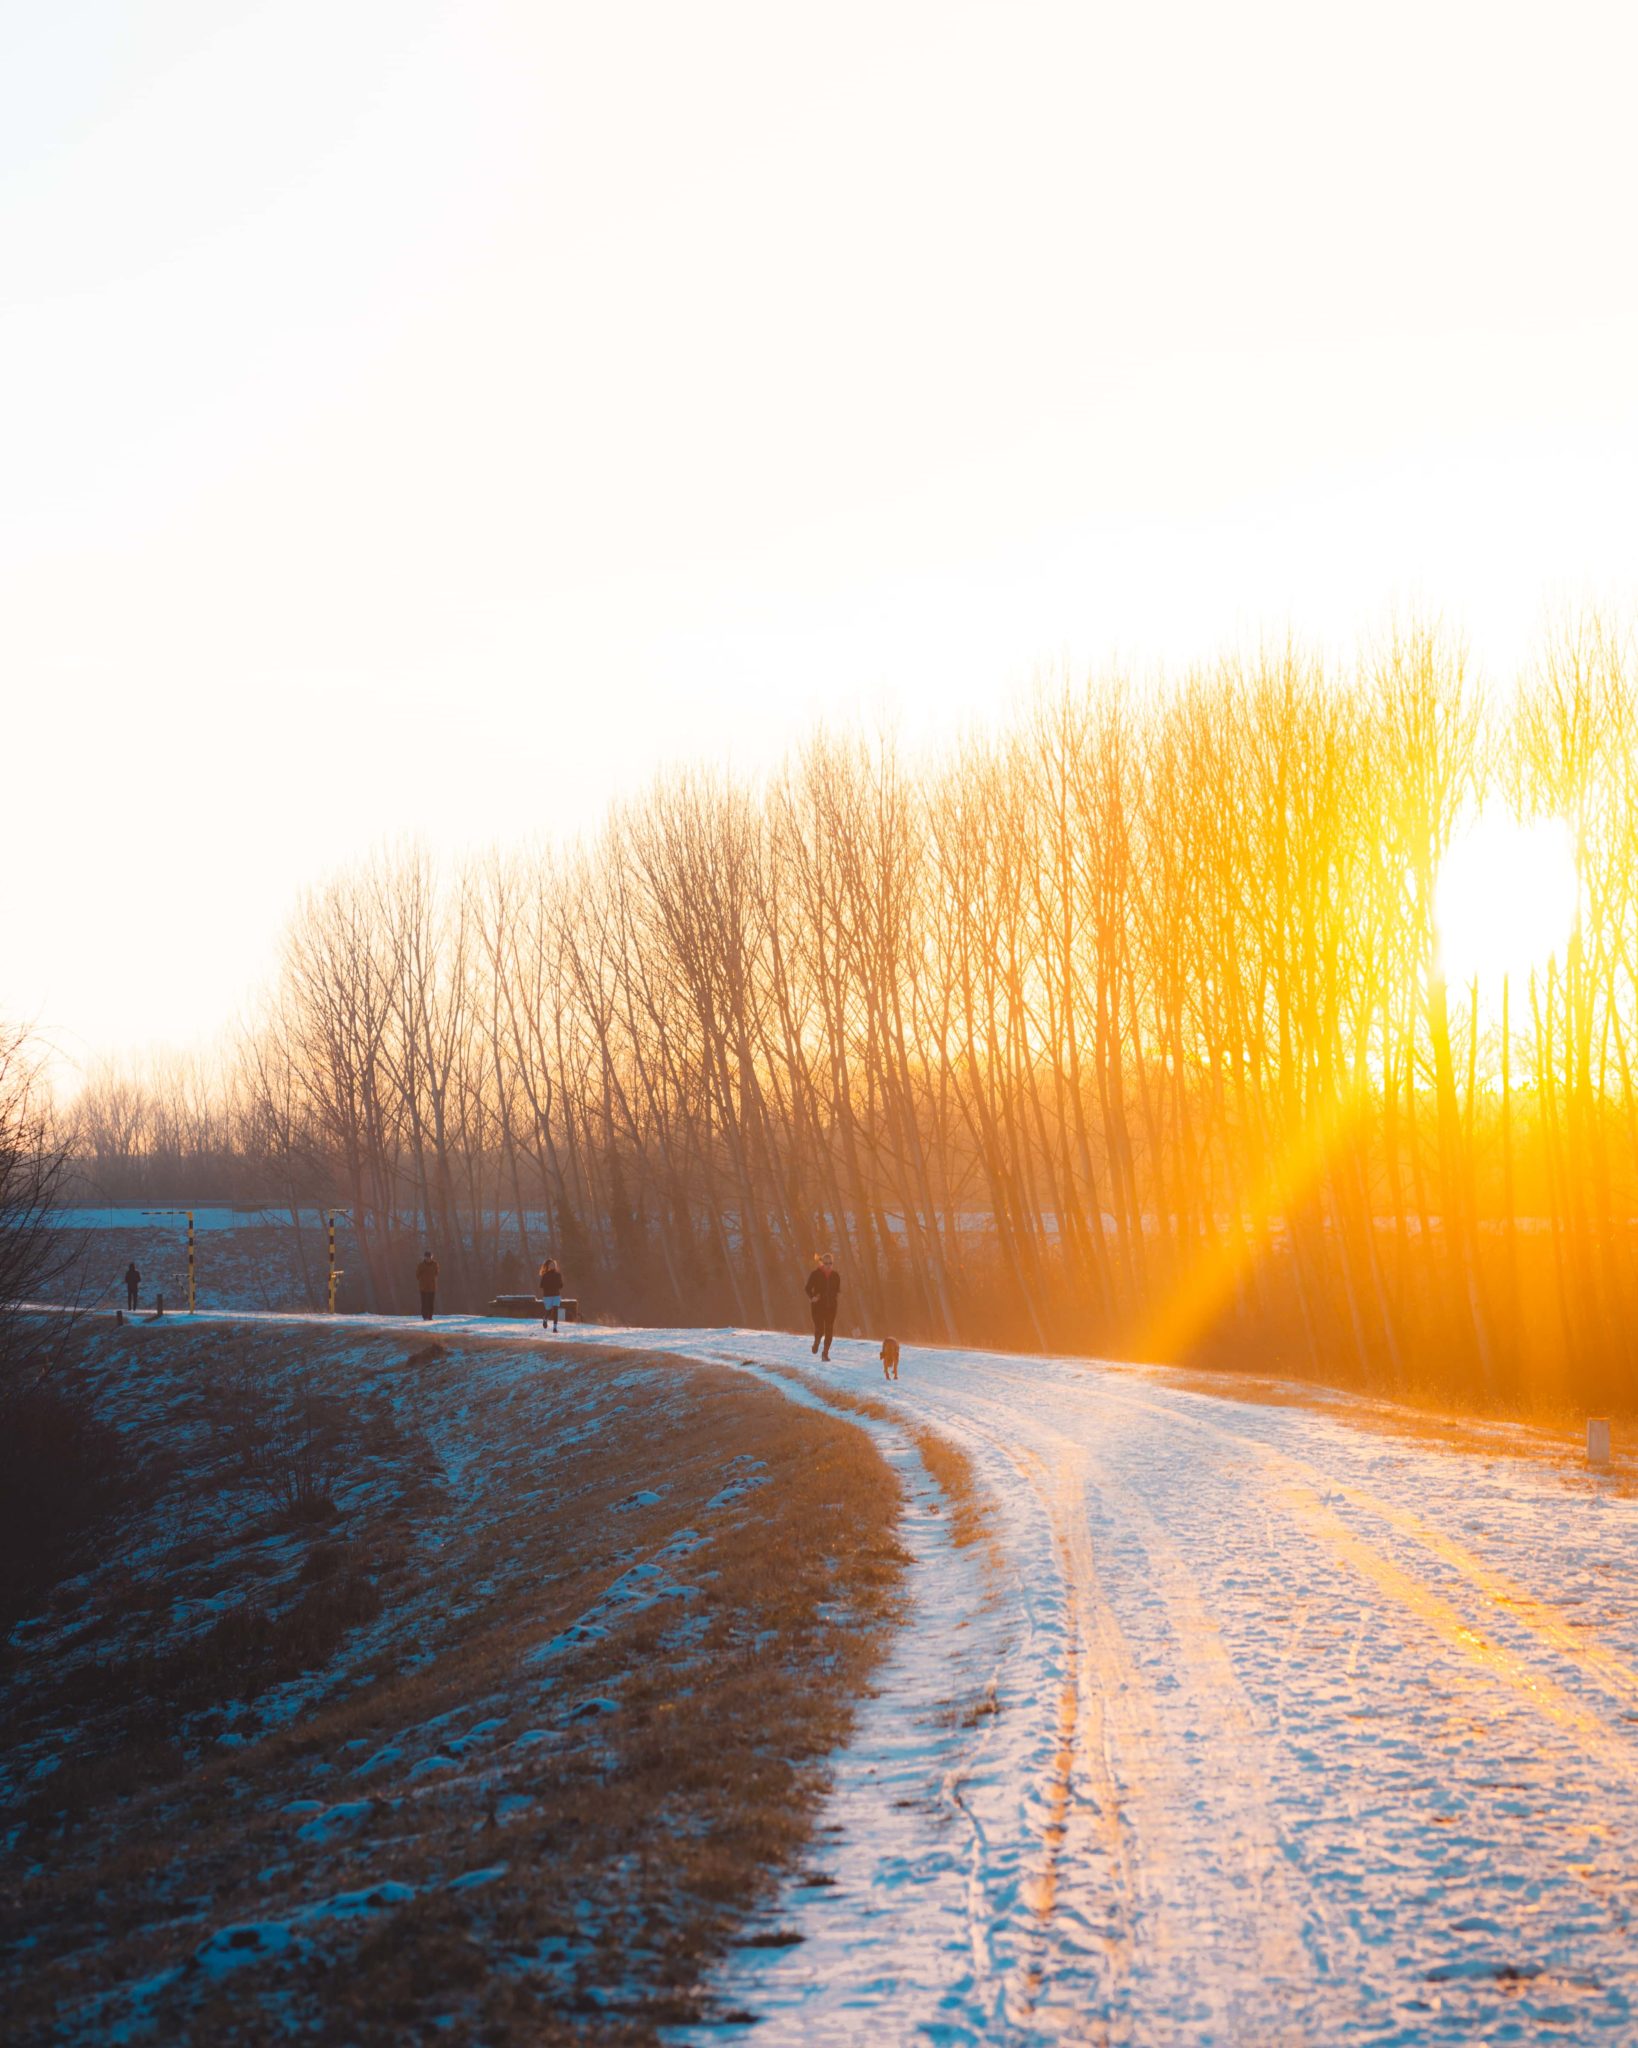 Four people jog and walk along a snowy rural path as the sun sets.